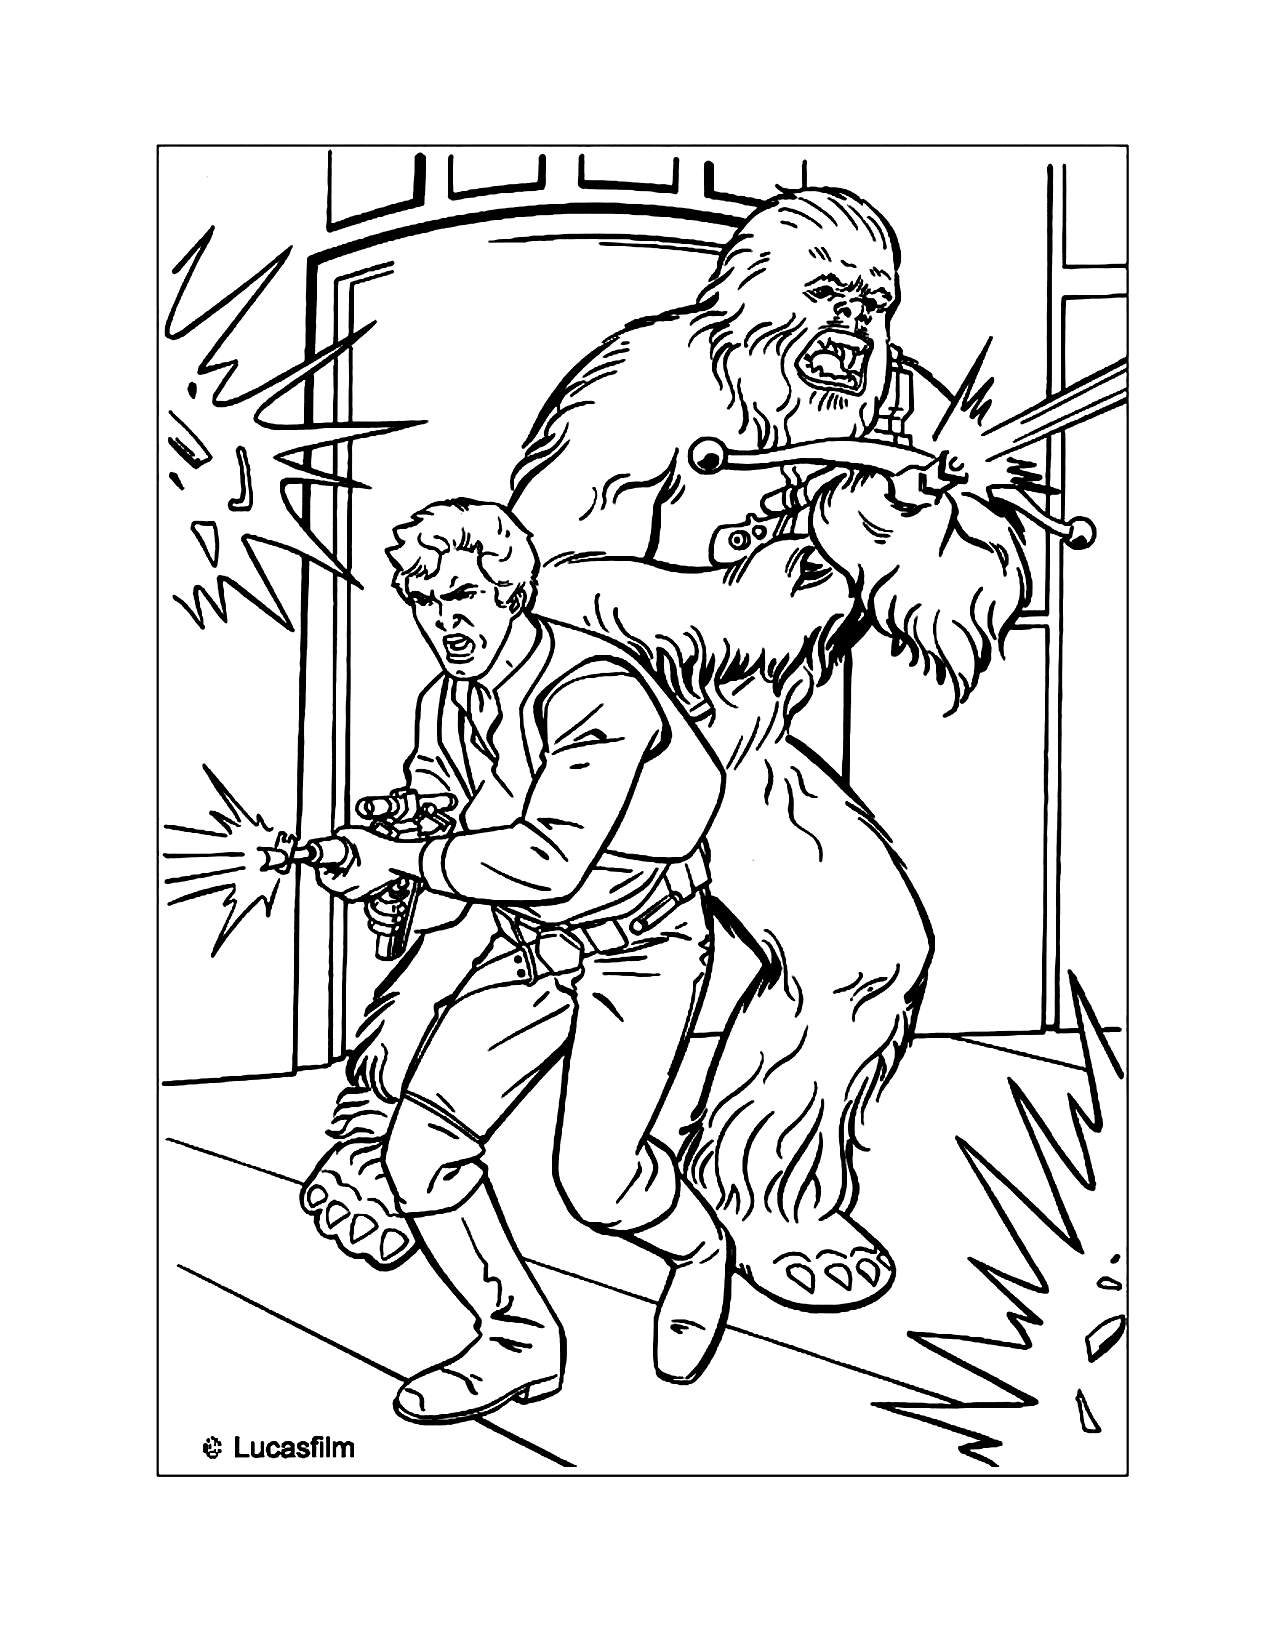 Han And Chewie Fighting Star Wars Coloring Page